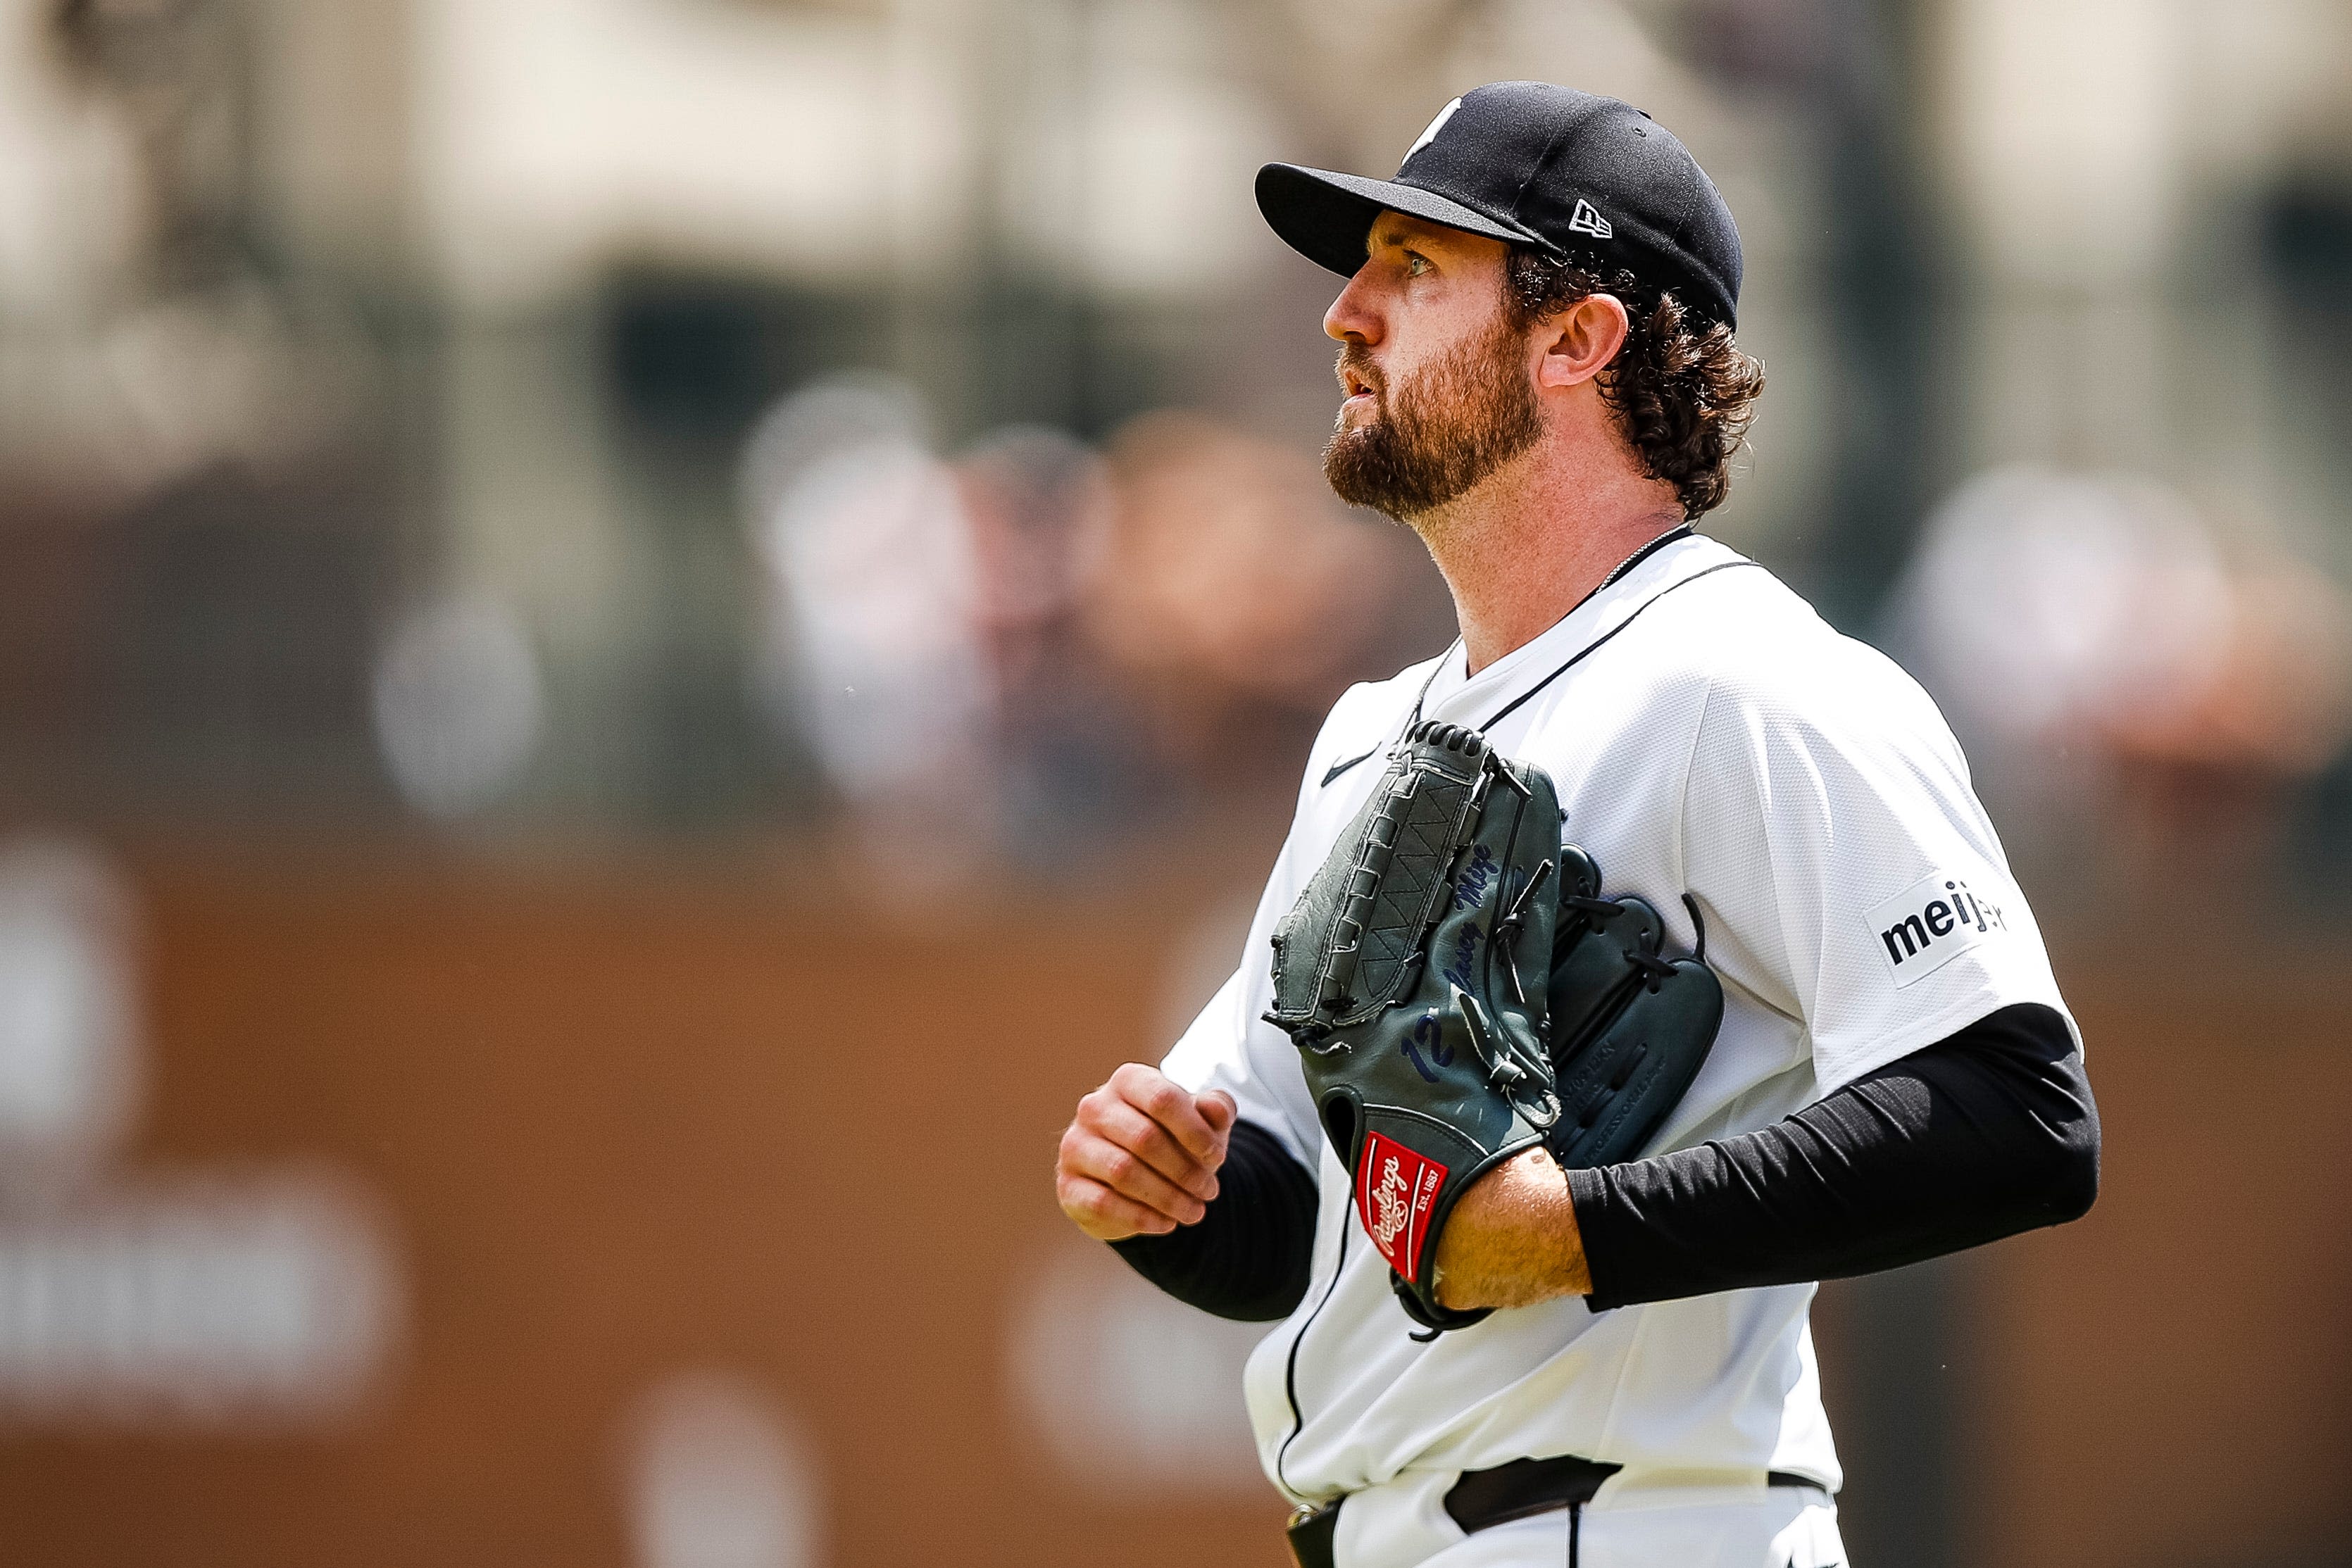 Detroit Tigers game vs. Atlanta Braves: Time, TV channel, lineup with Casey Mize on mound